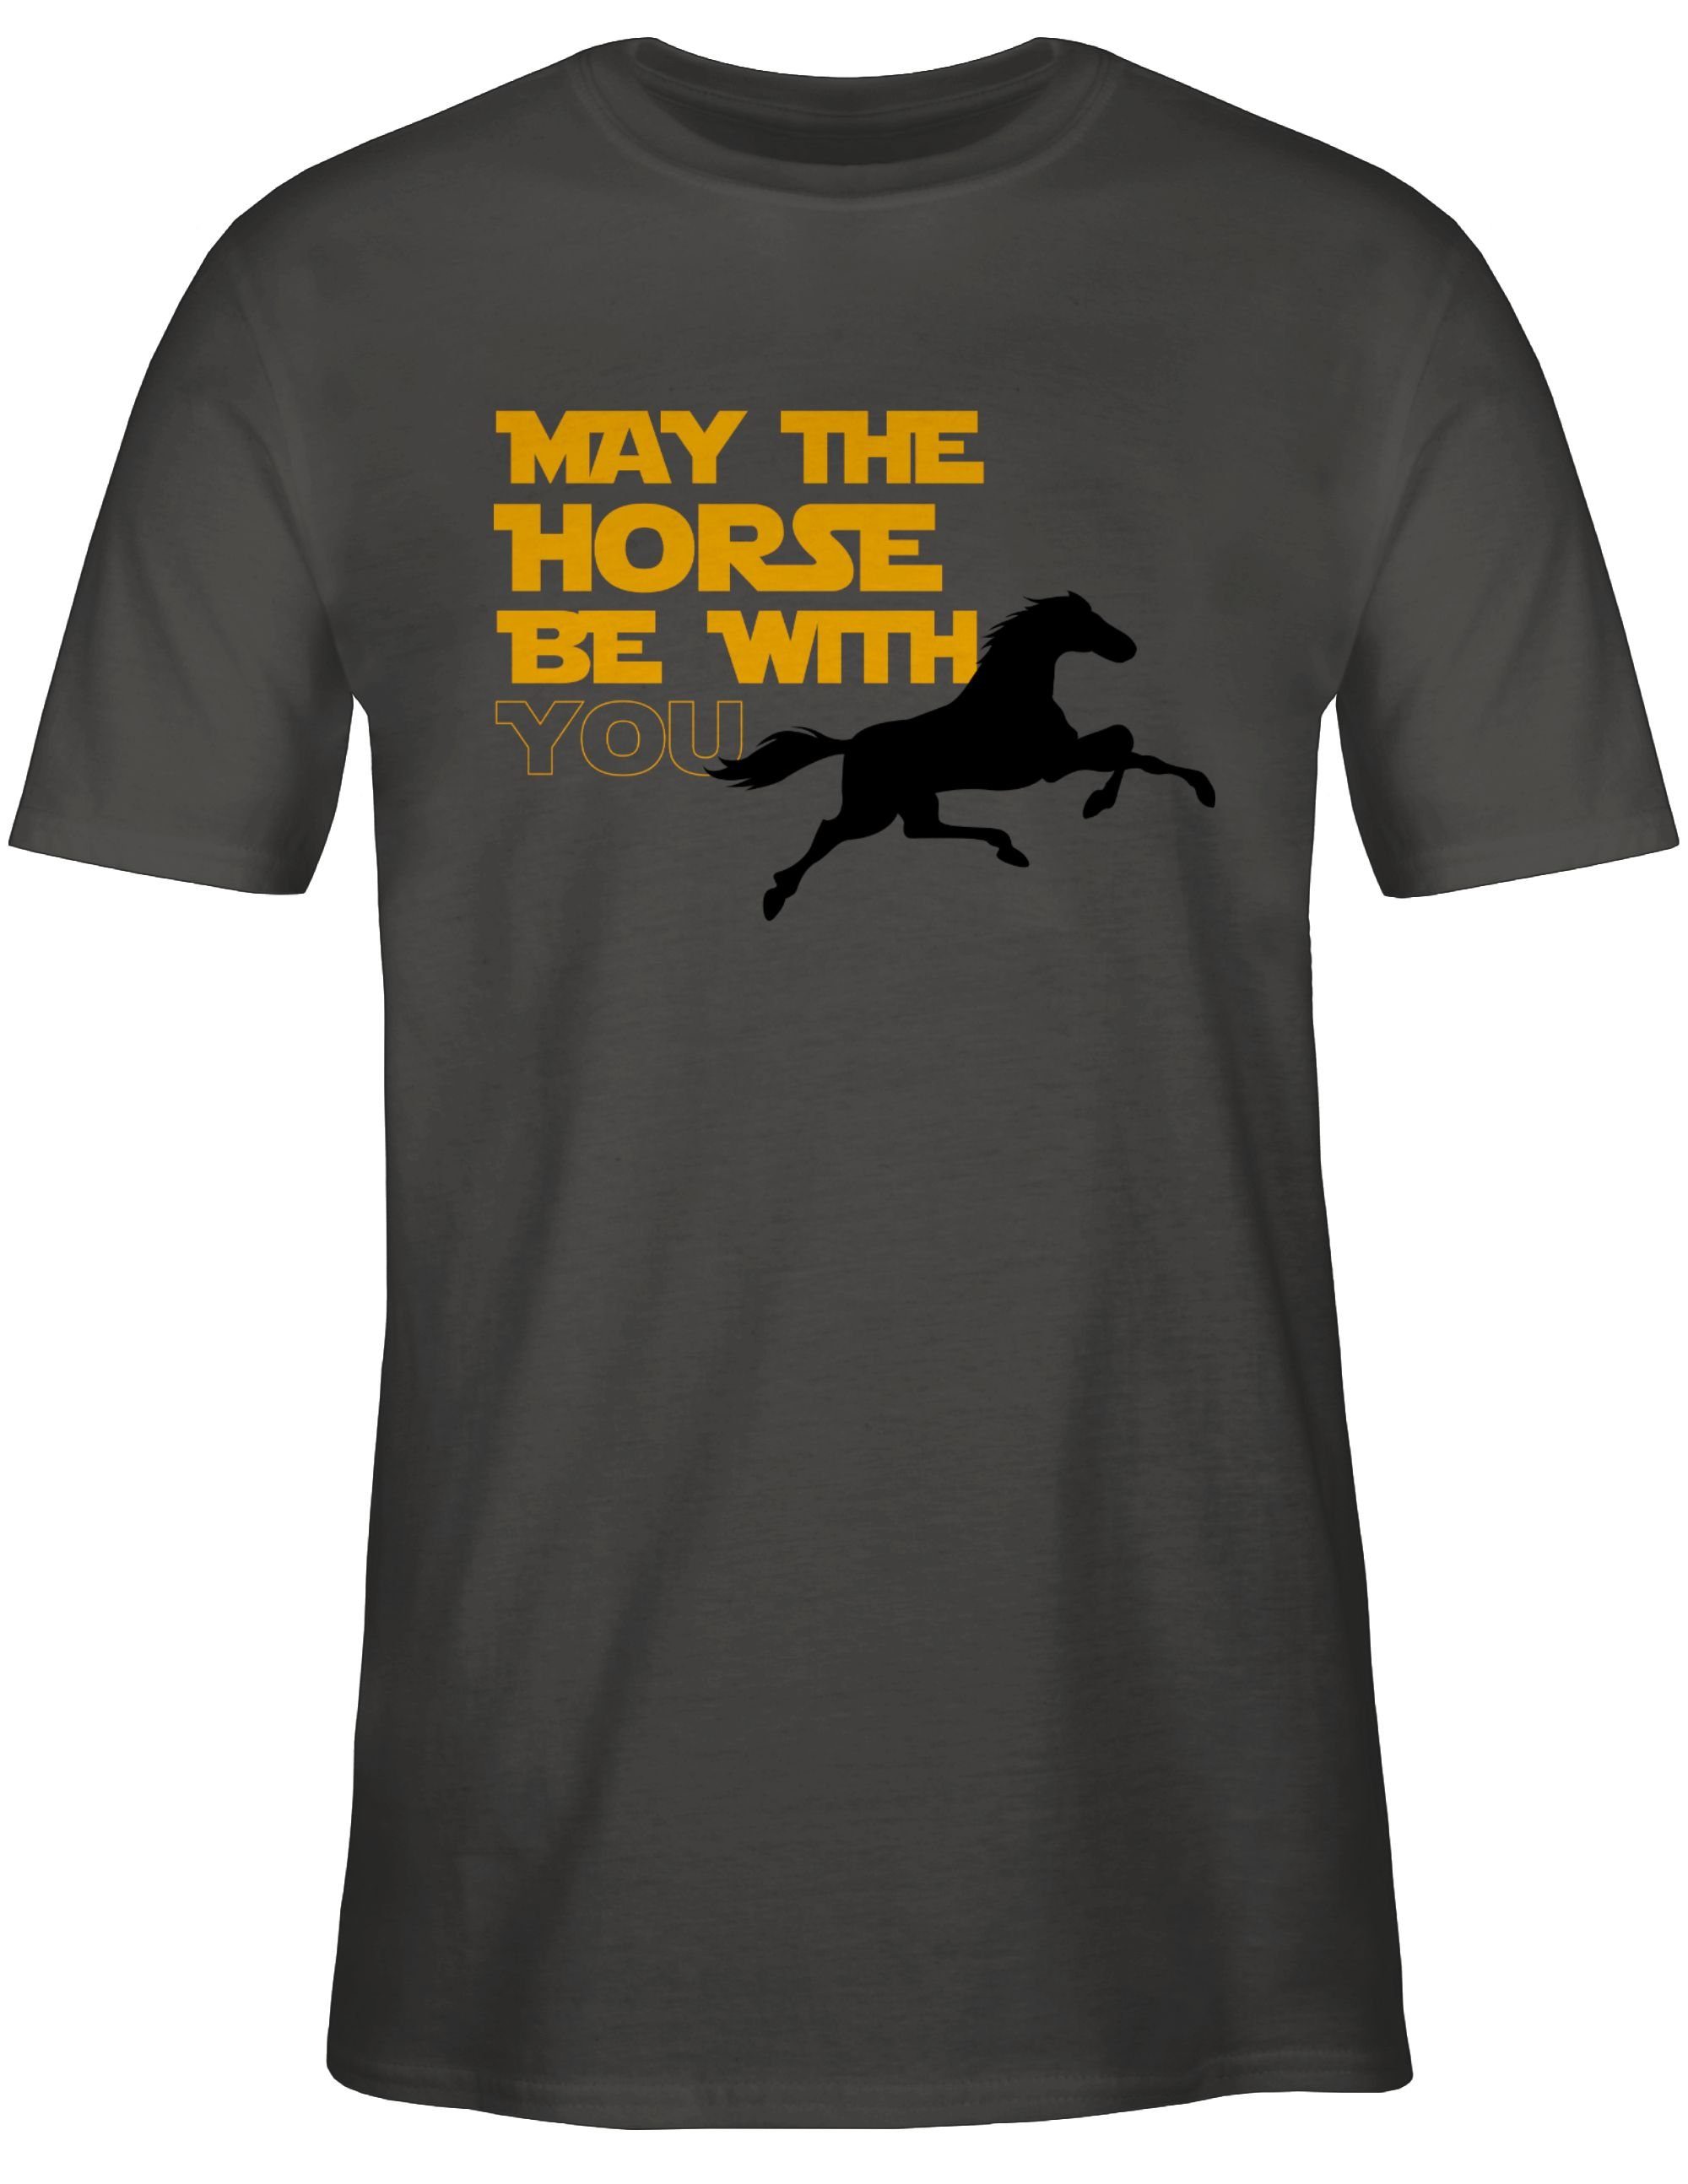 Dunkelgrau with horse 1 the be T-Shirt May you Shirtracer Pferd